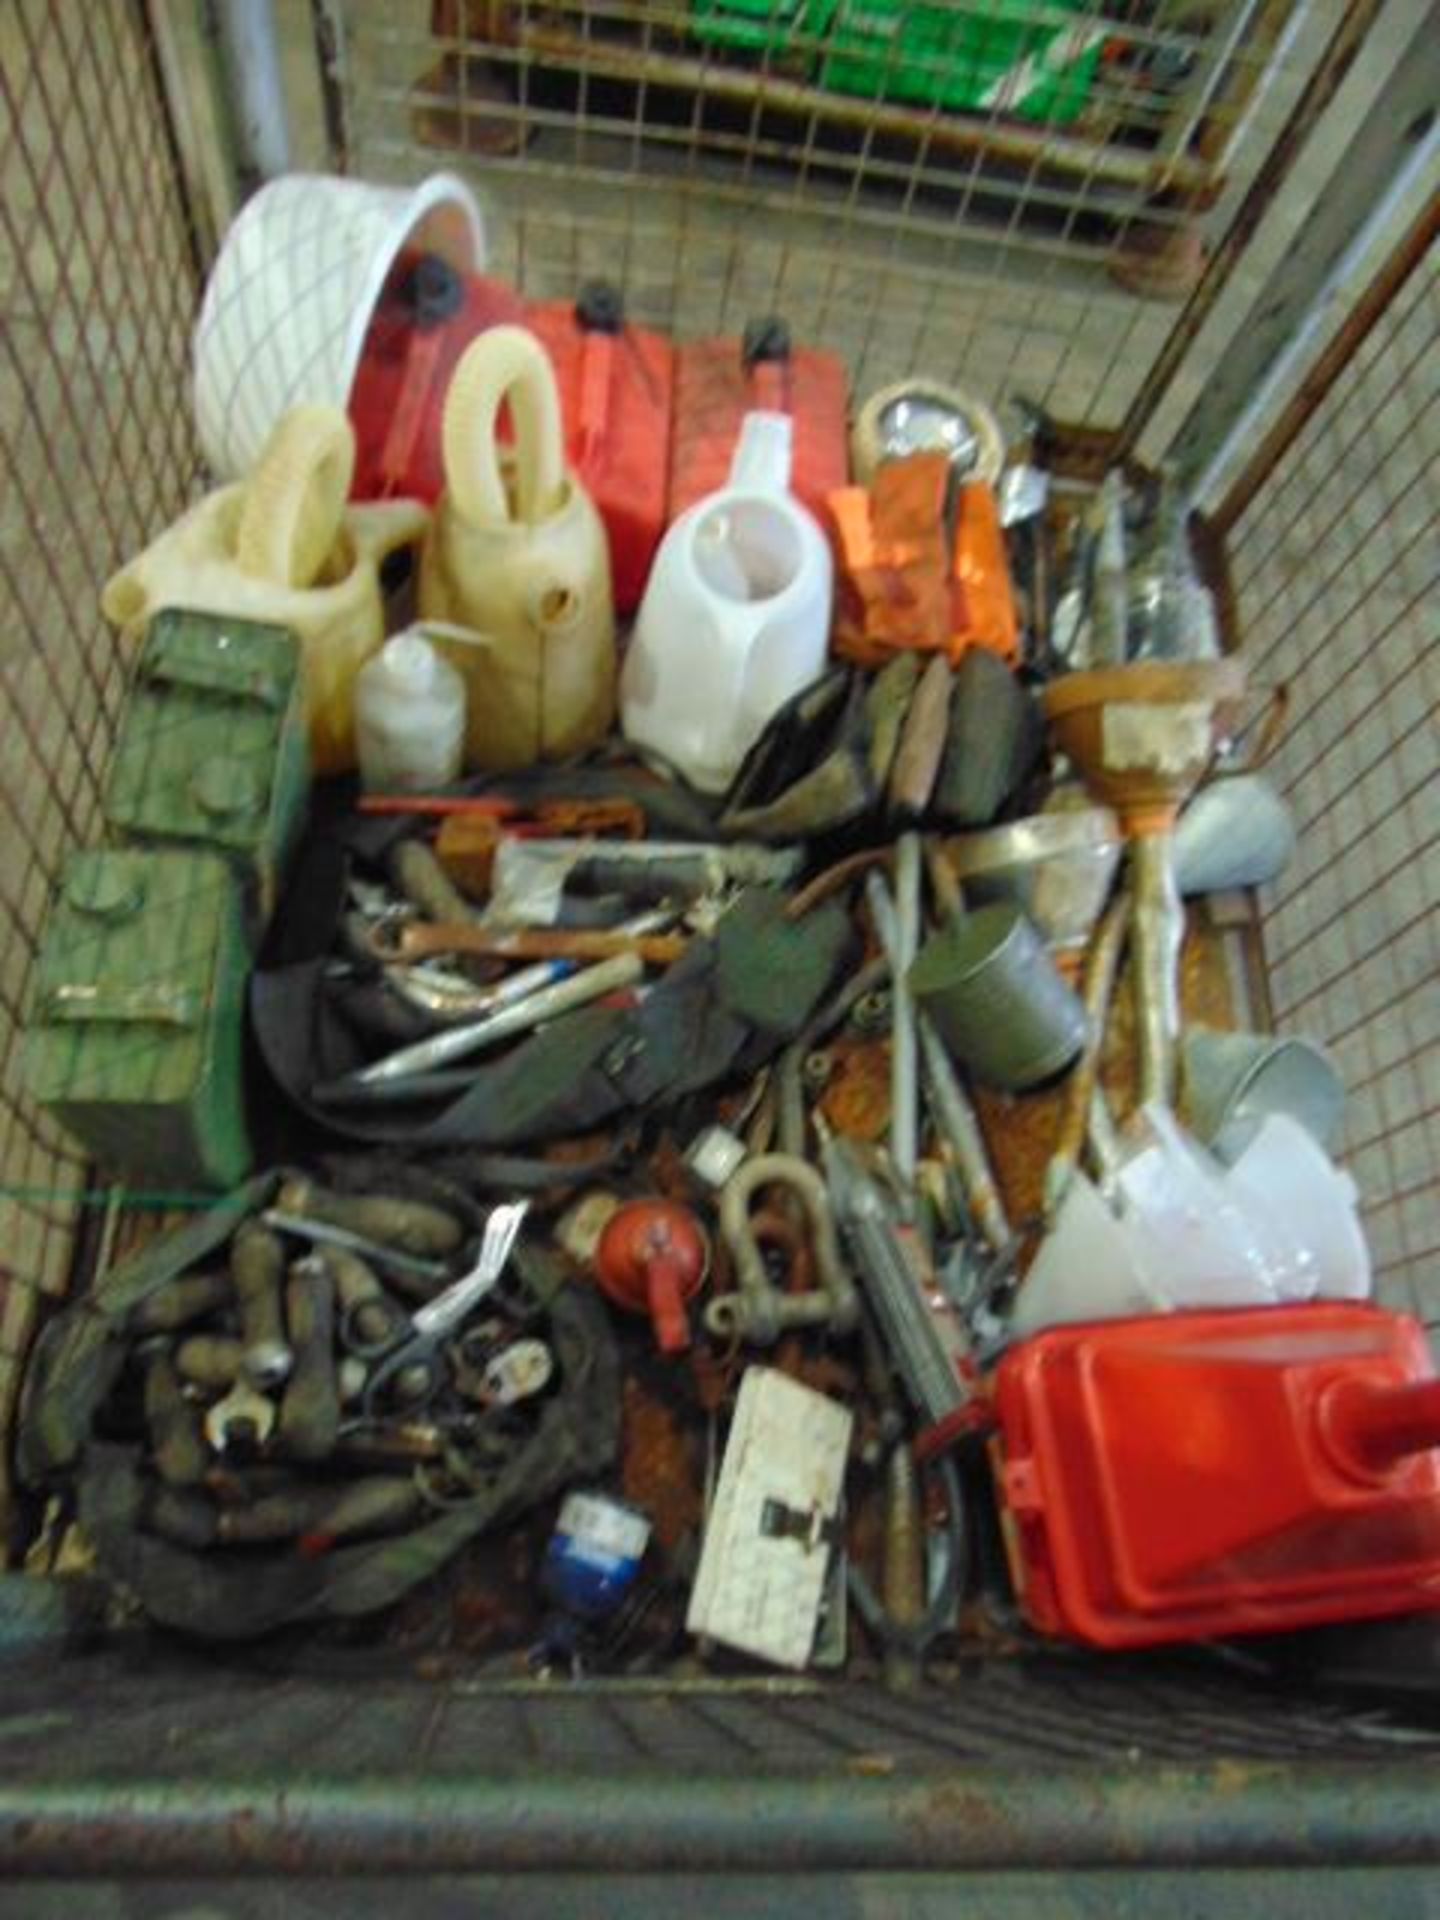 Stillage of Workshop Tools and Accessories - Image 2 of 4